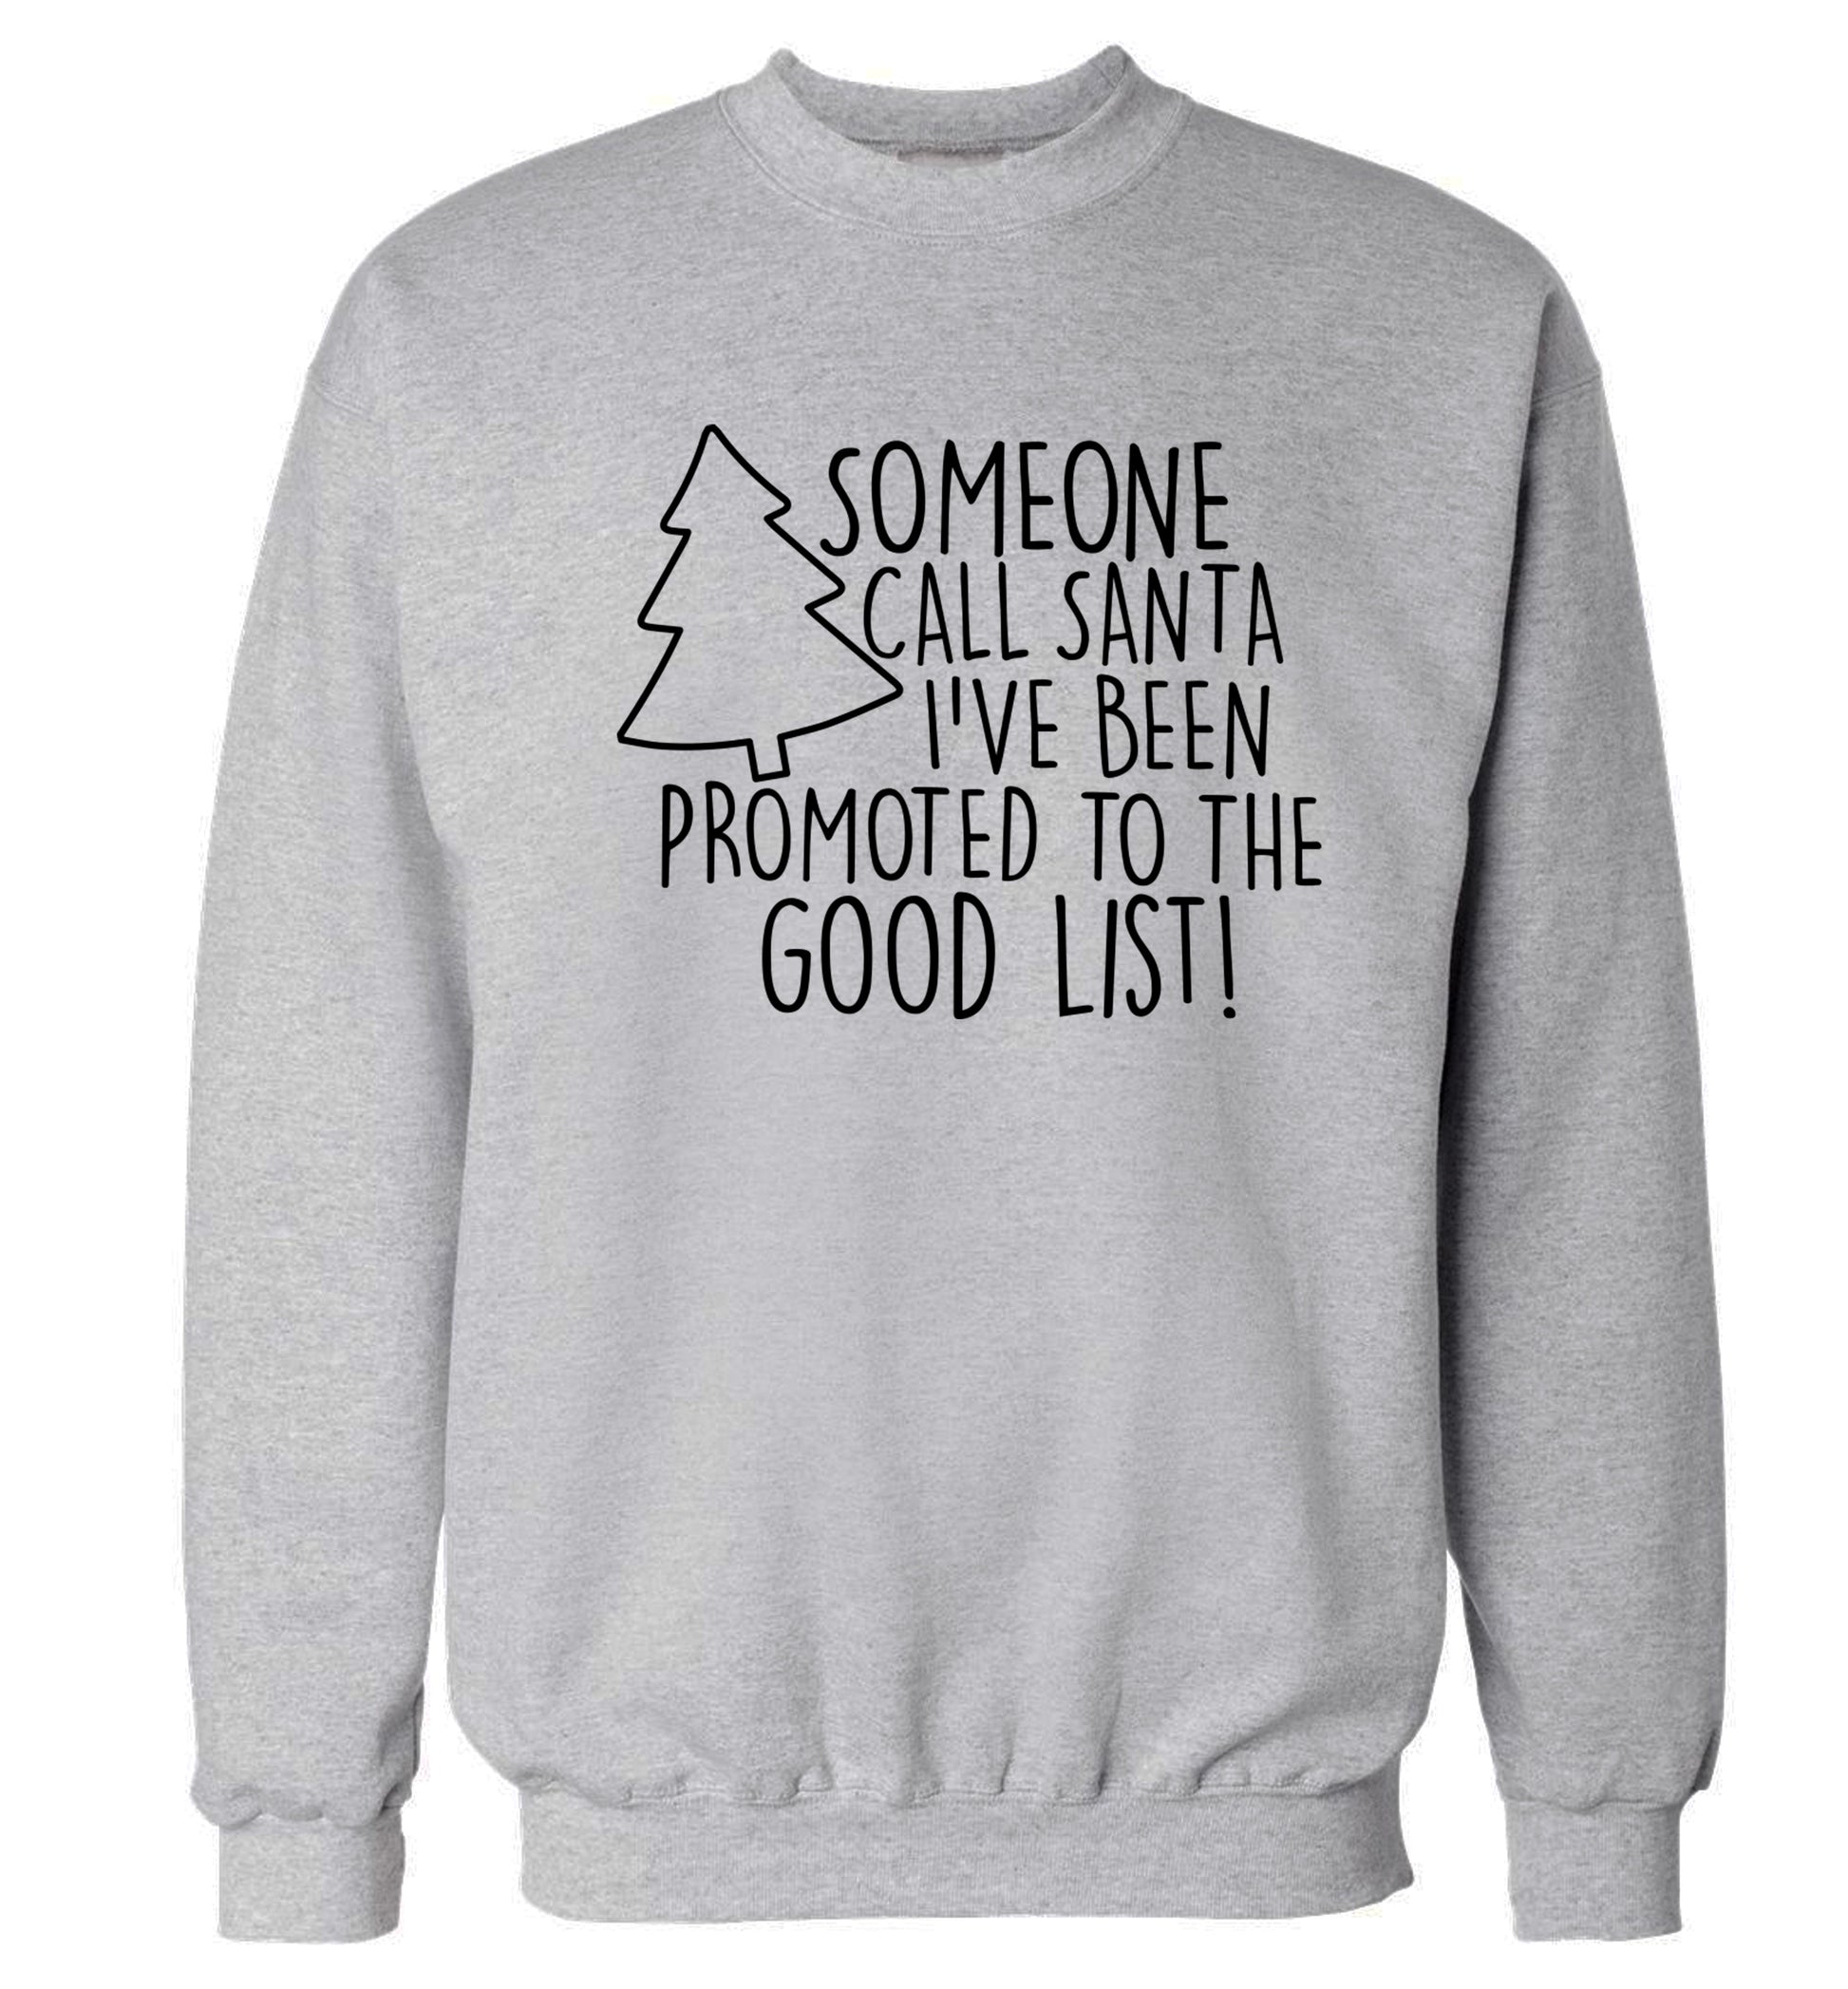 Someone call santa I've been promoted to the good list! Adult's unisex grey Sweater 2XL